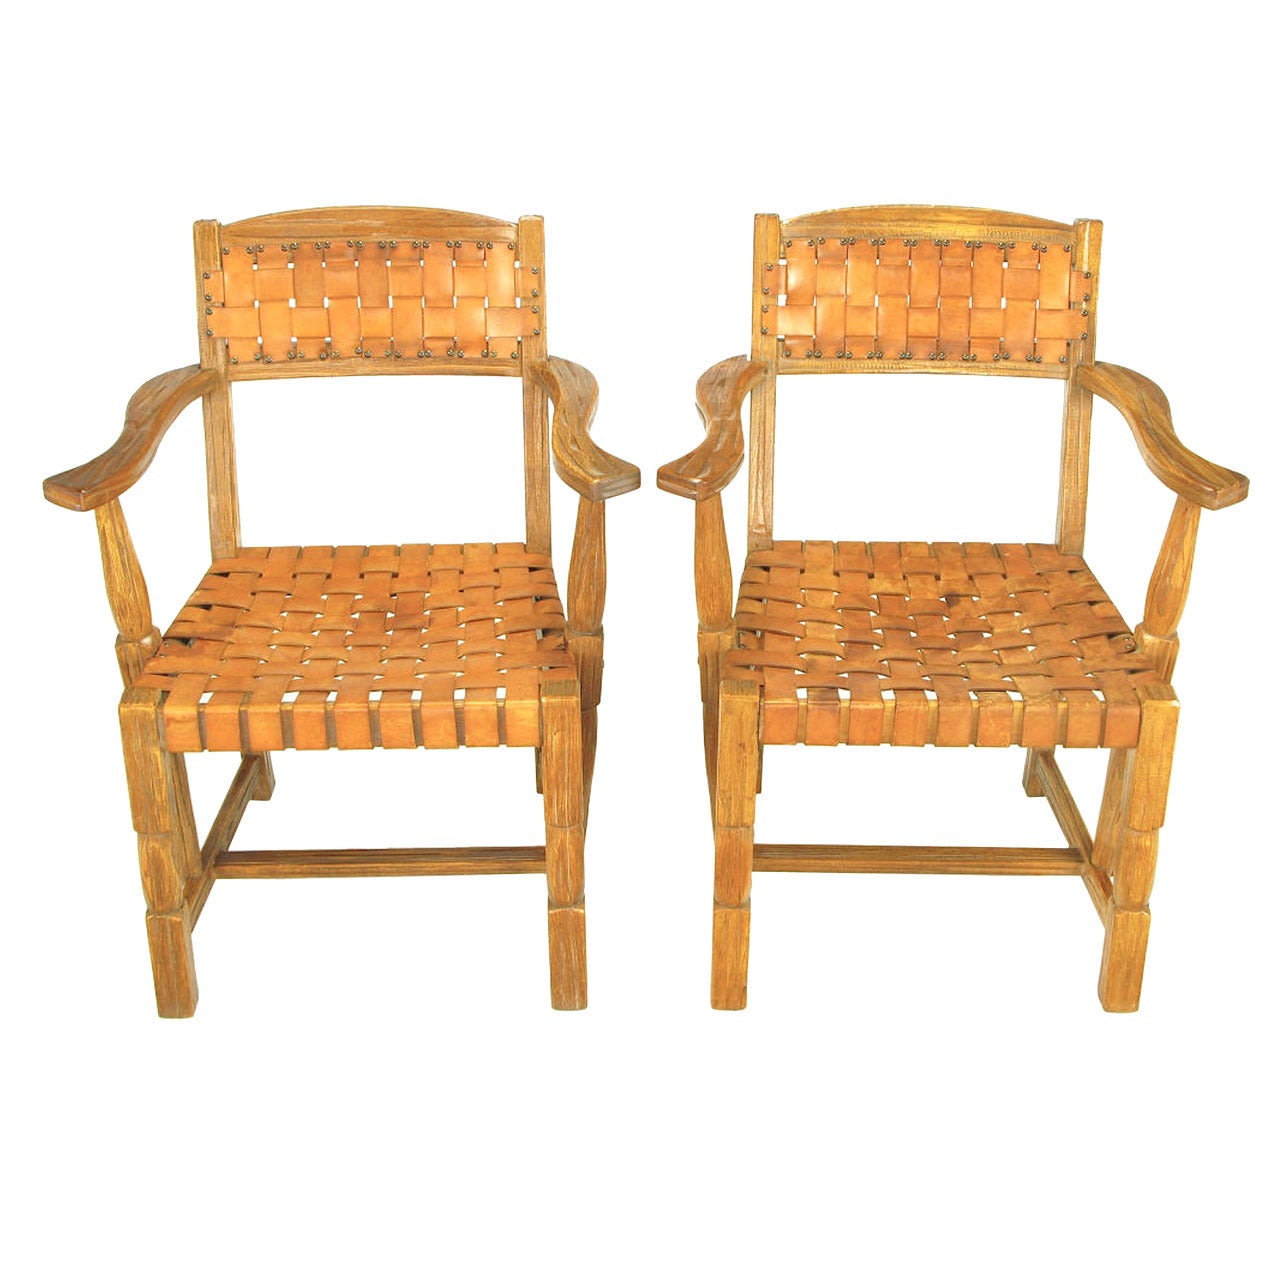 Pair of Rustic White Oak and Woven Leather Armchairs